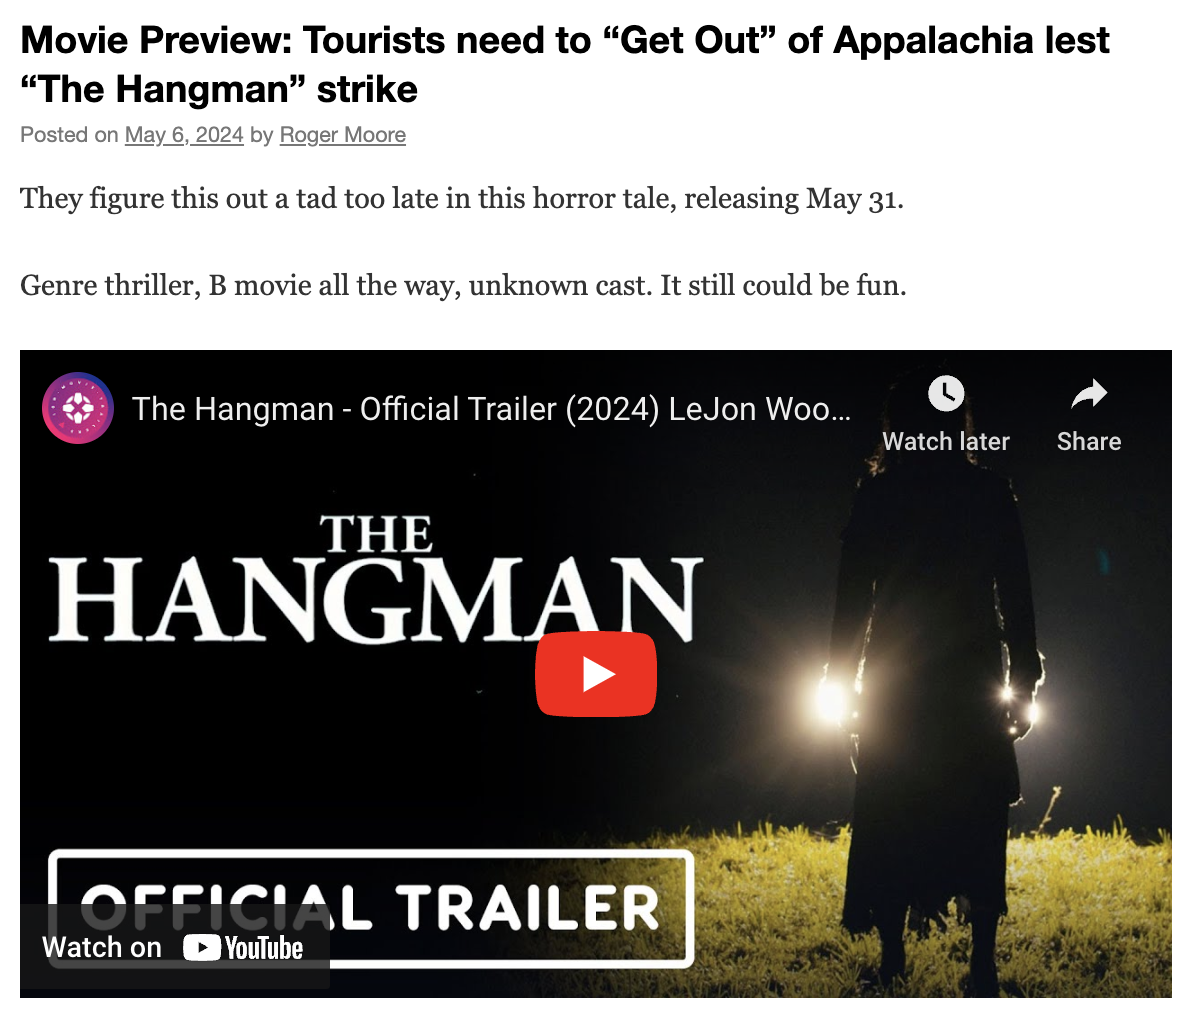 Movie Preview: Tourists need to “Get Out” of Appalachia lest “The Hangman” strike